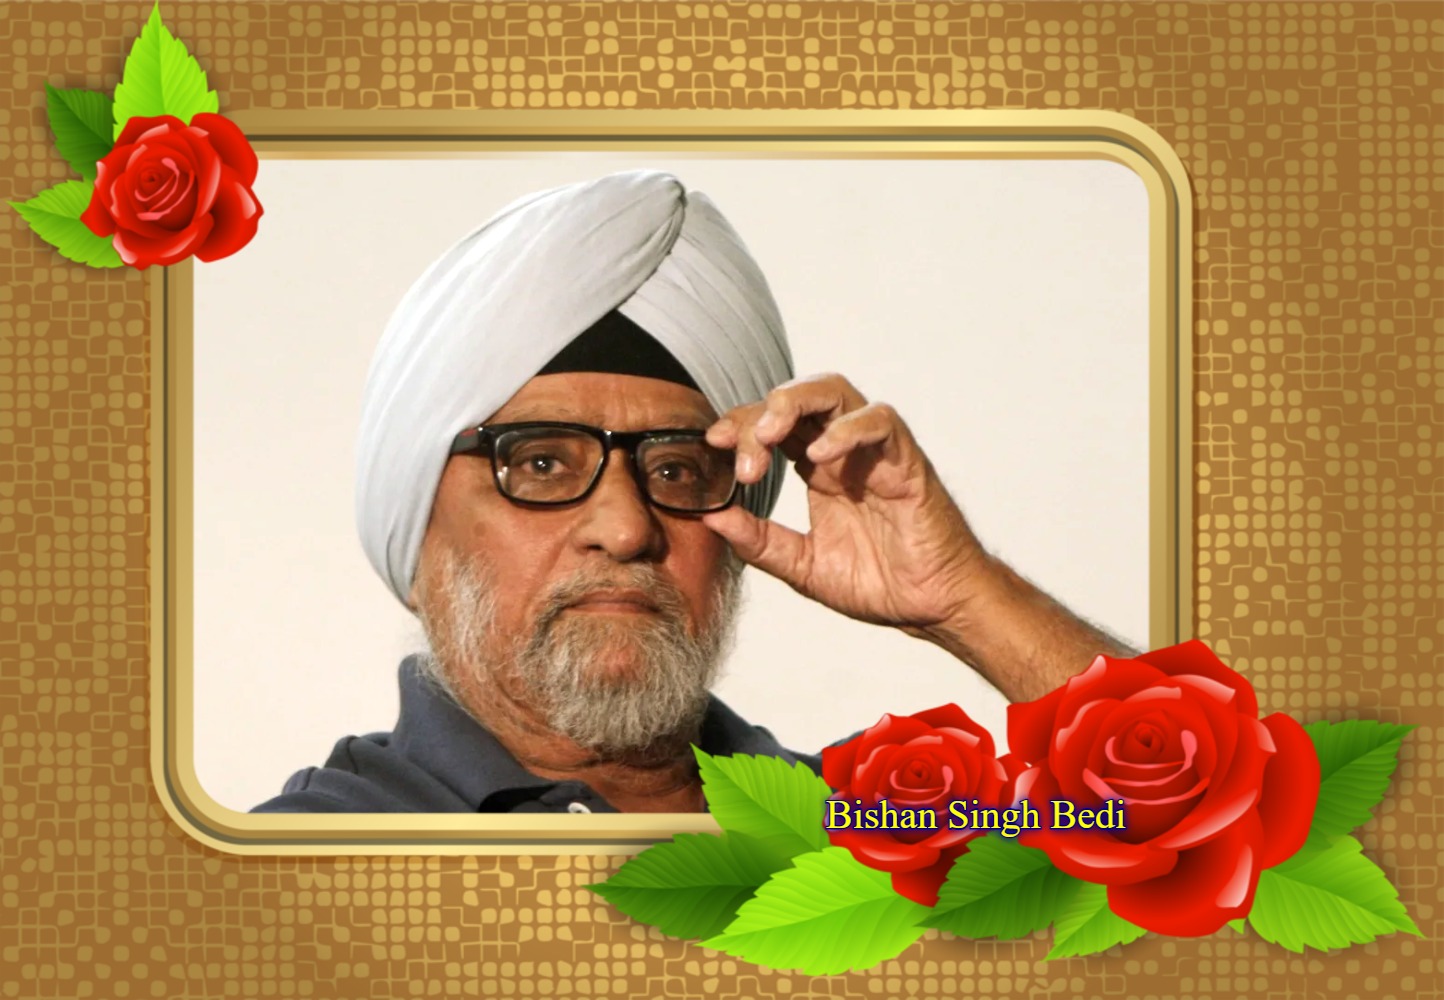 Read more about the article “Cricketer Bishan Singh Bedi Passes Into History”